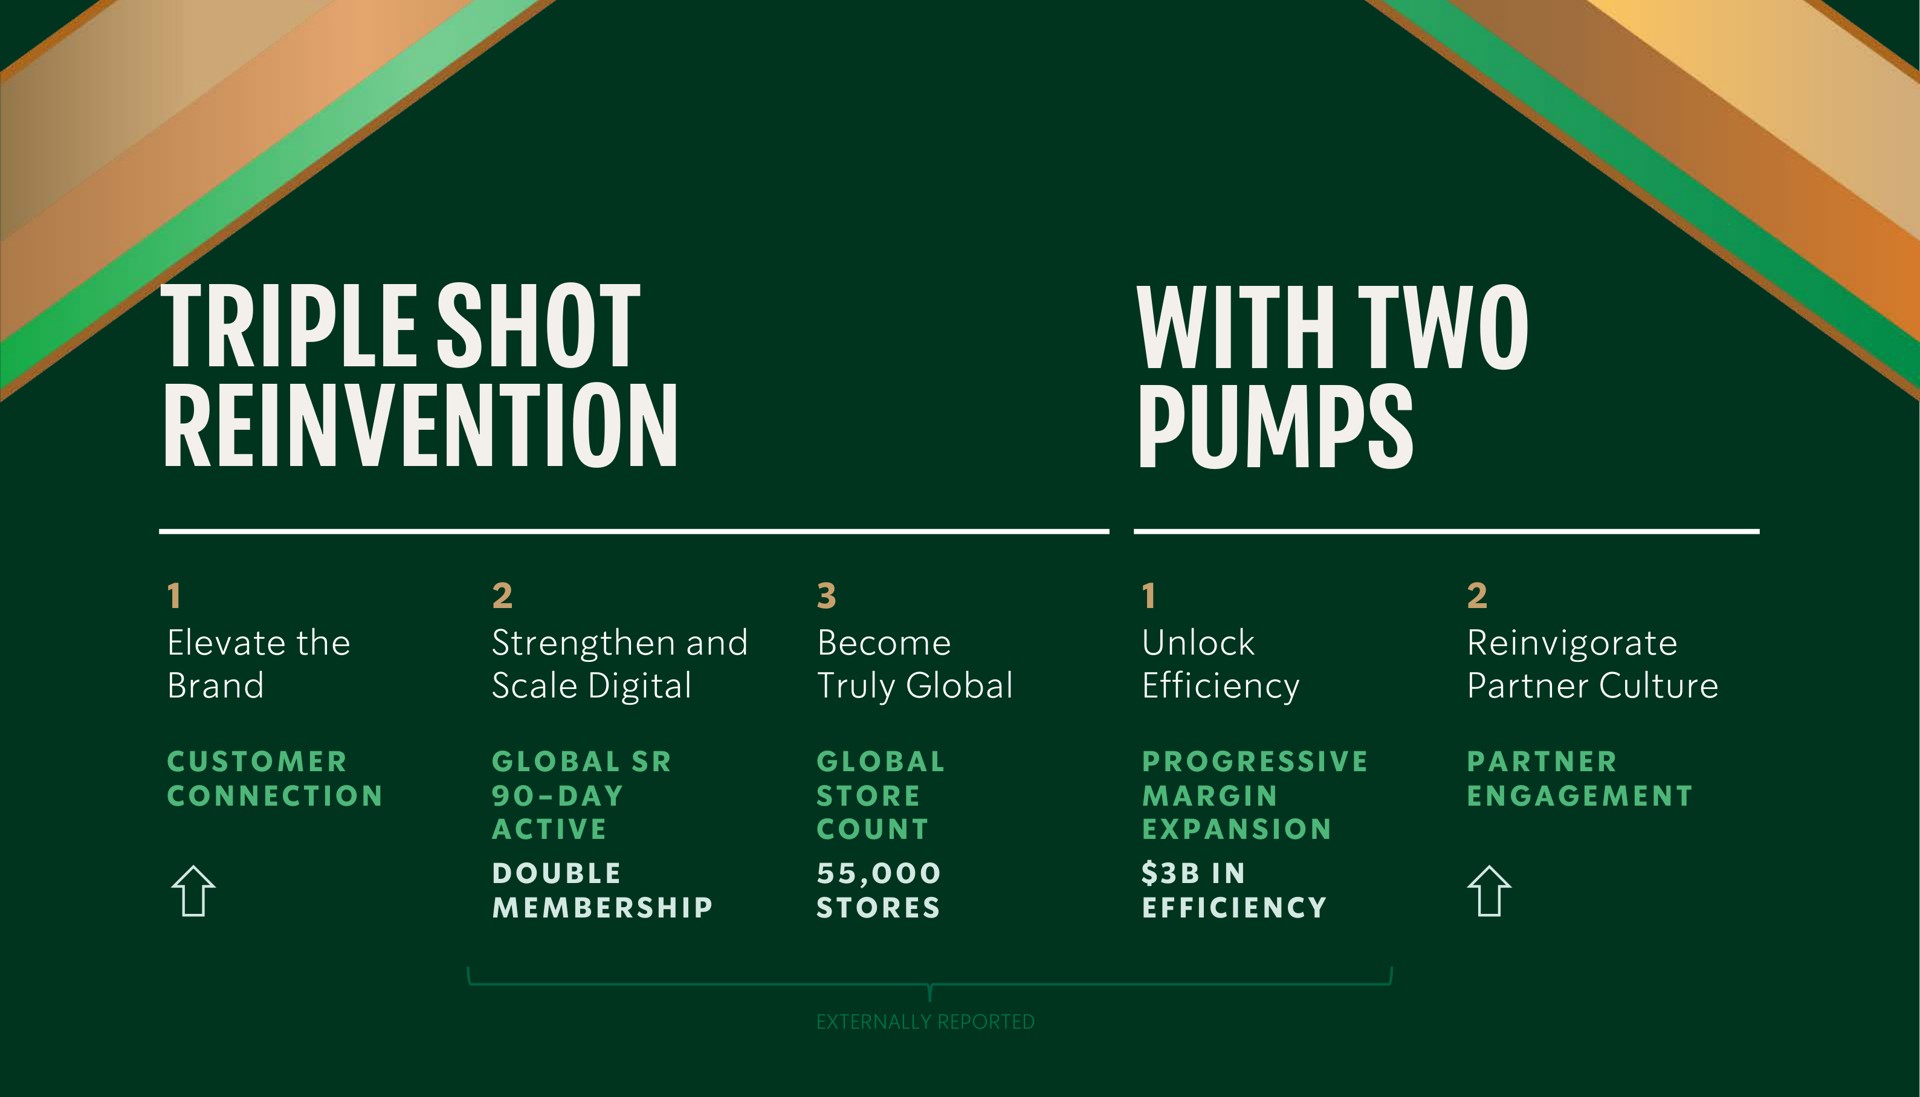 triple shot reinvention with two pumps if if | Starbucks